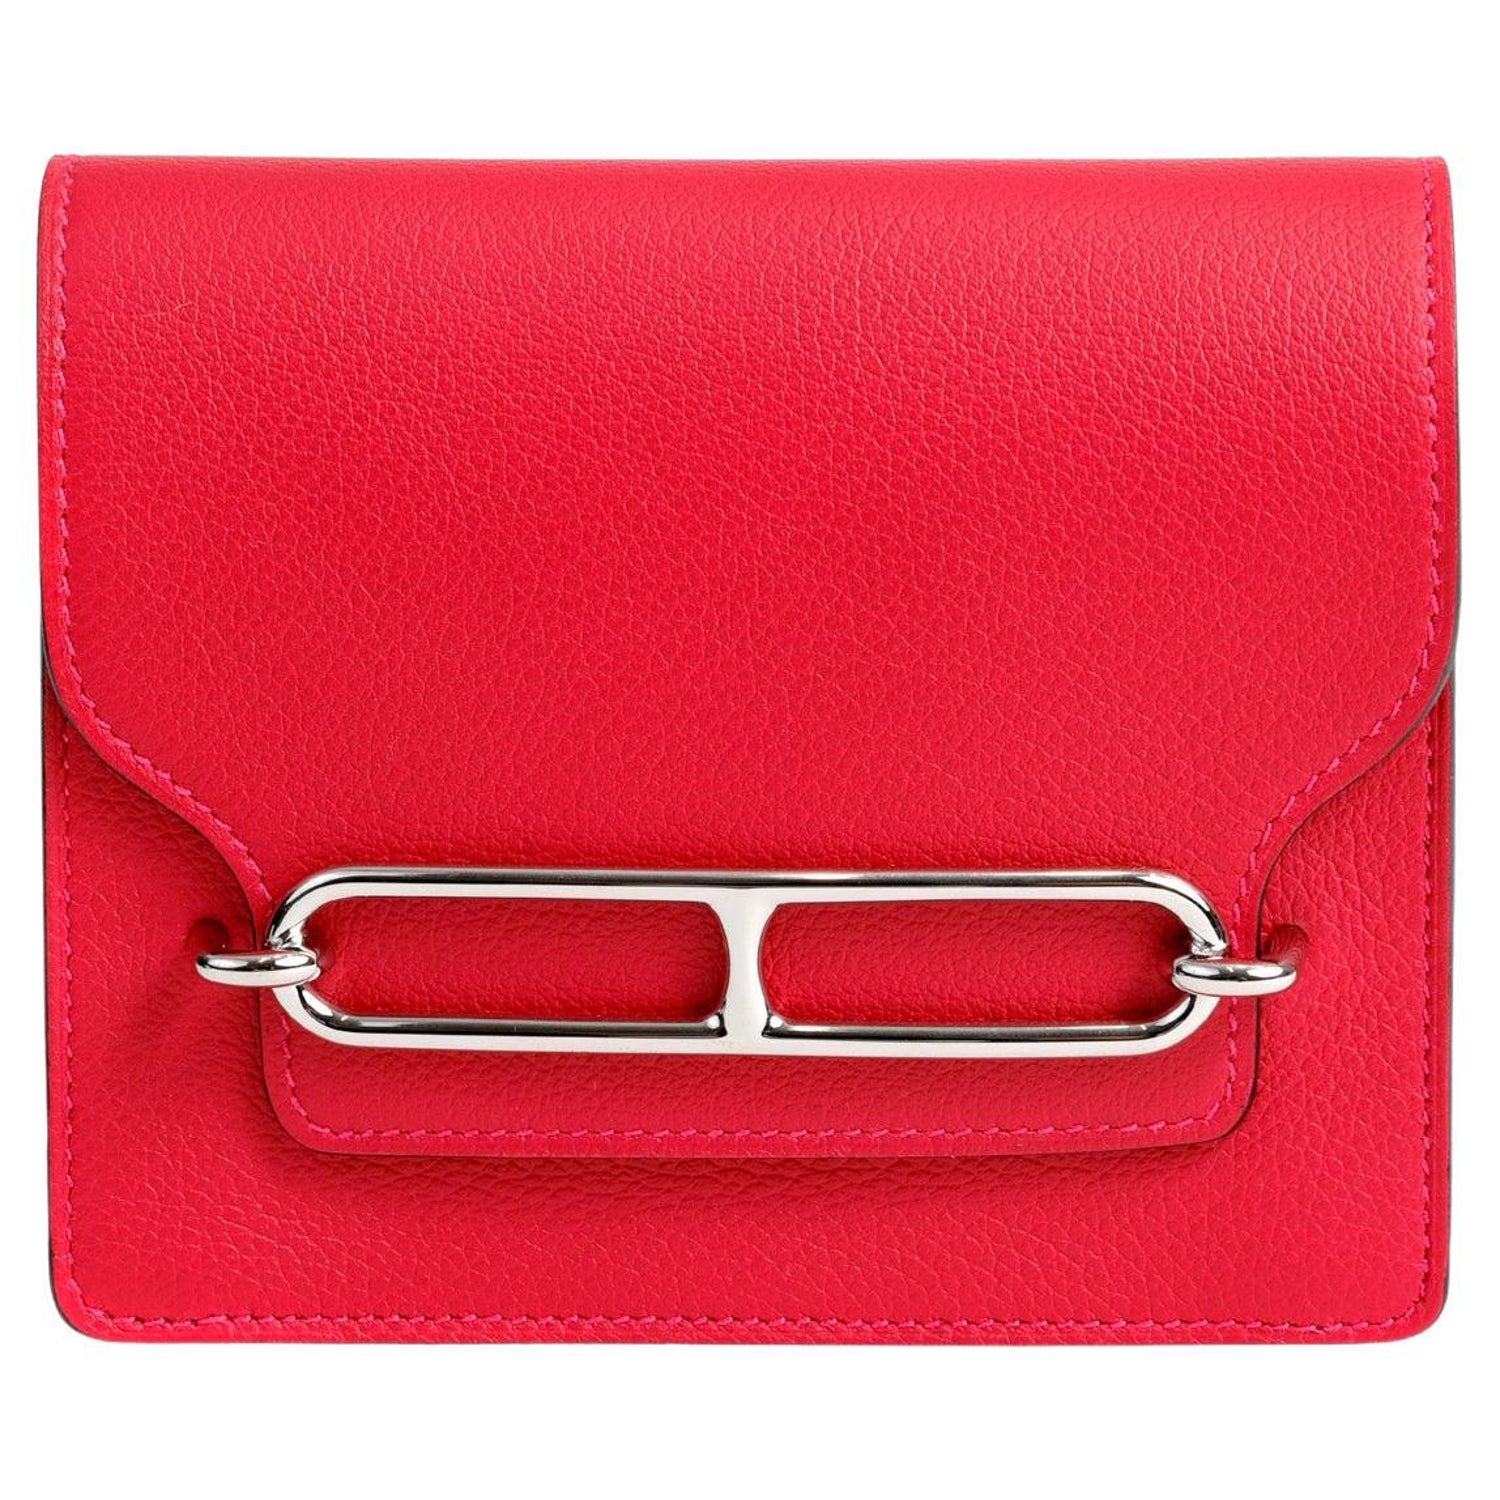 Hermes GHW Roulis Slim Wallet Evercolor Leather Rouge H Red